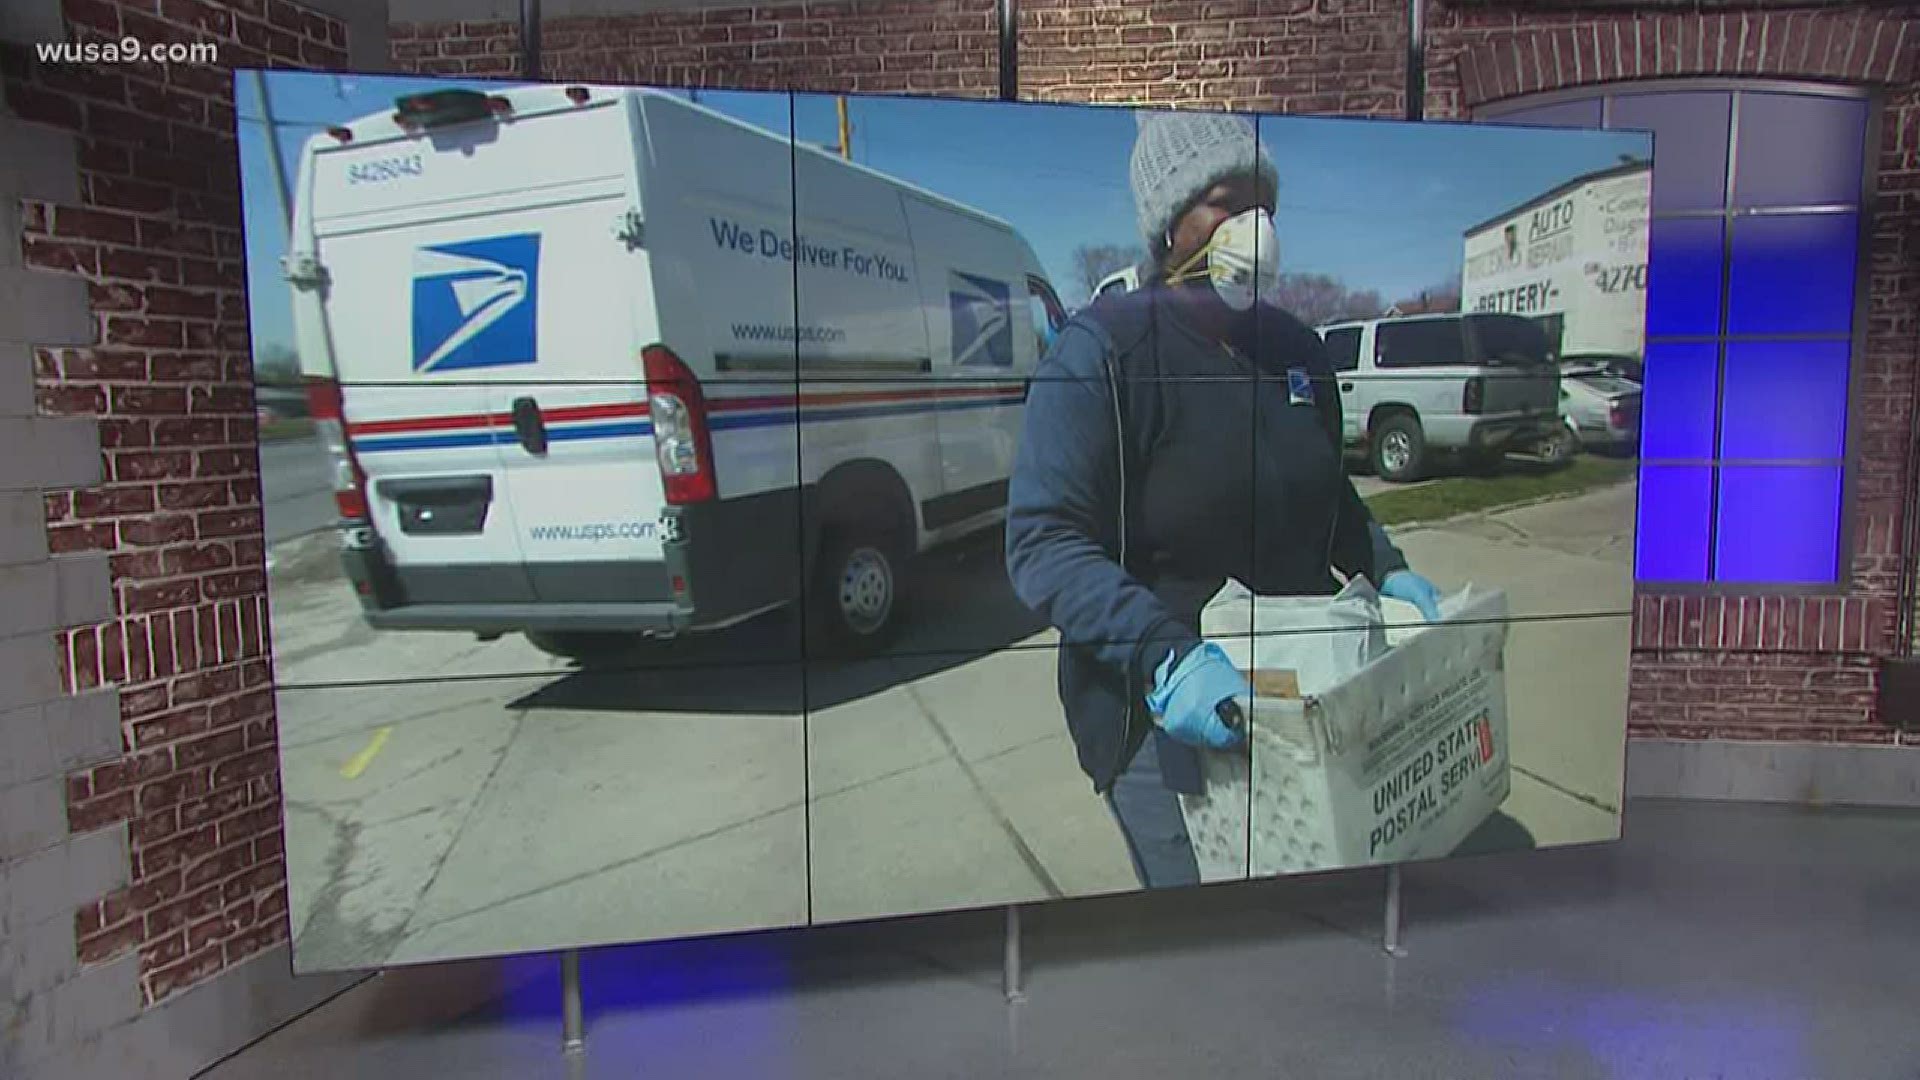 4,000 USPS employees are in self-quarantine right now after possible exposure to COVID-19.